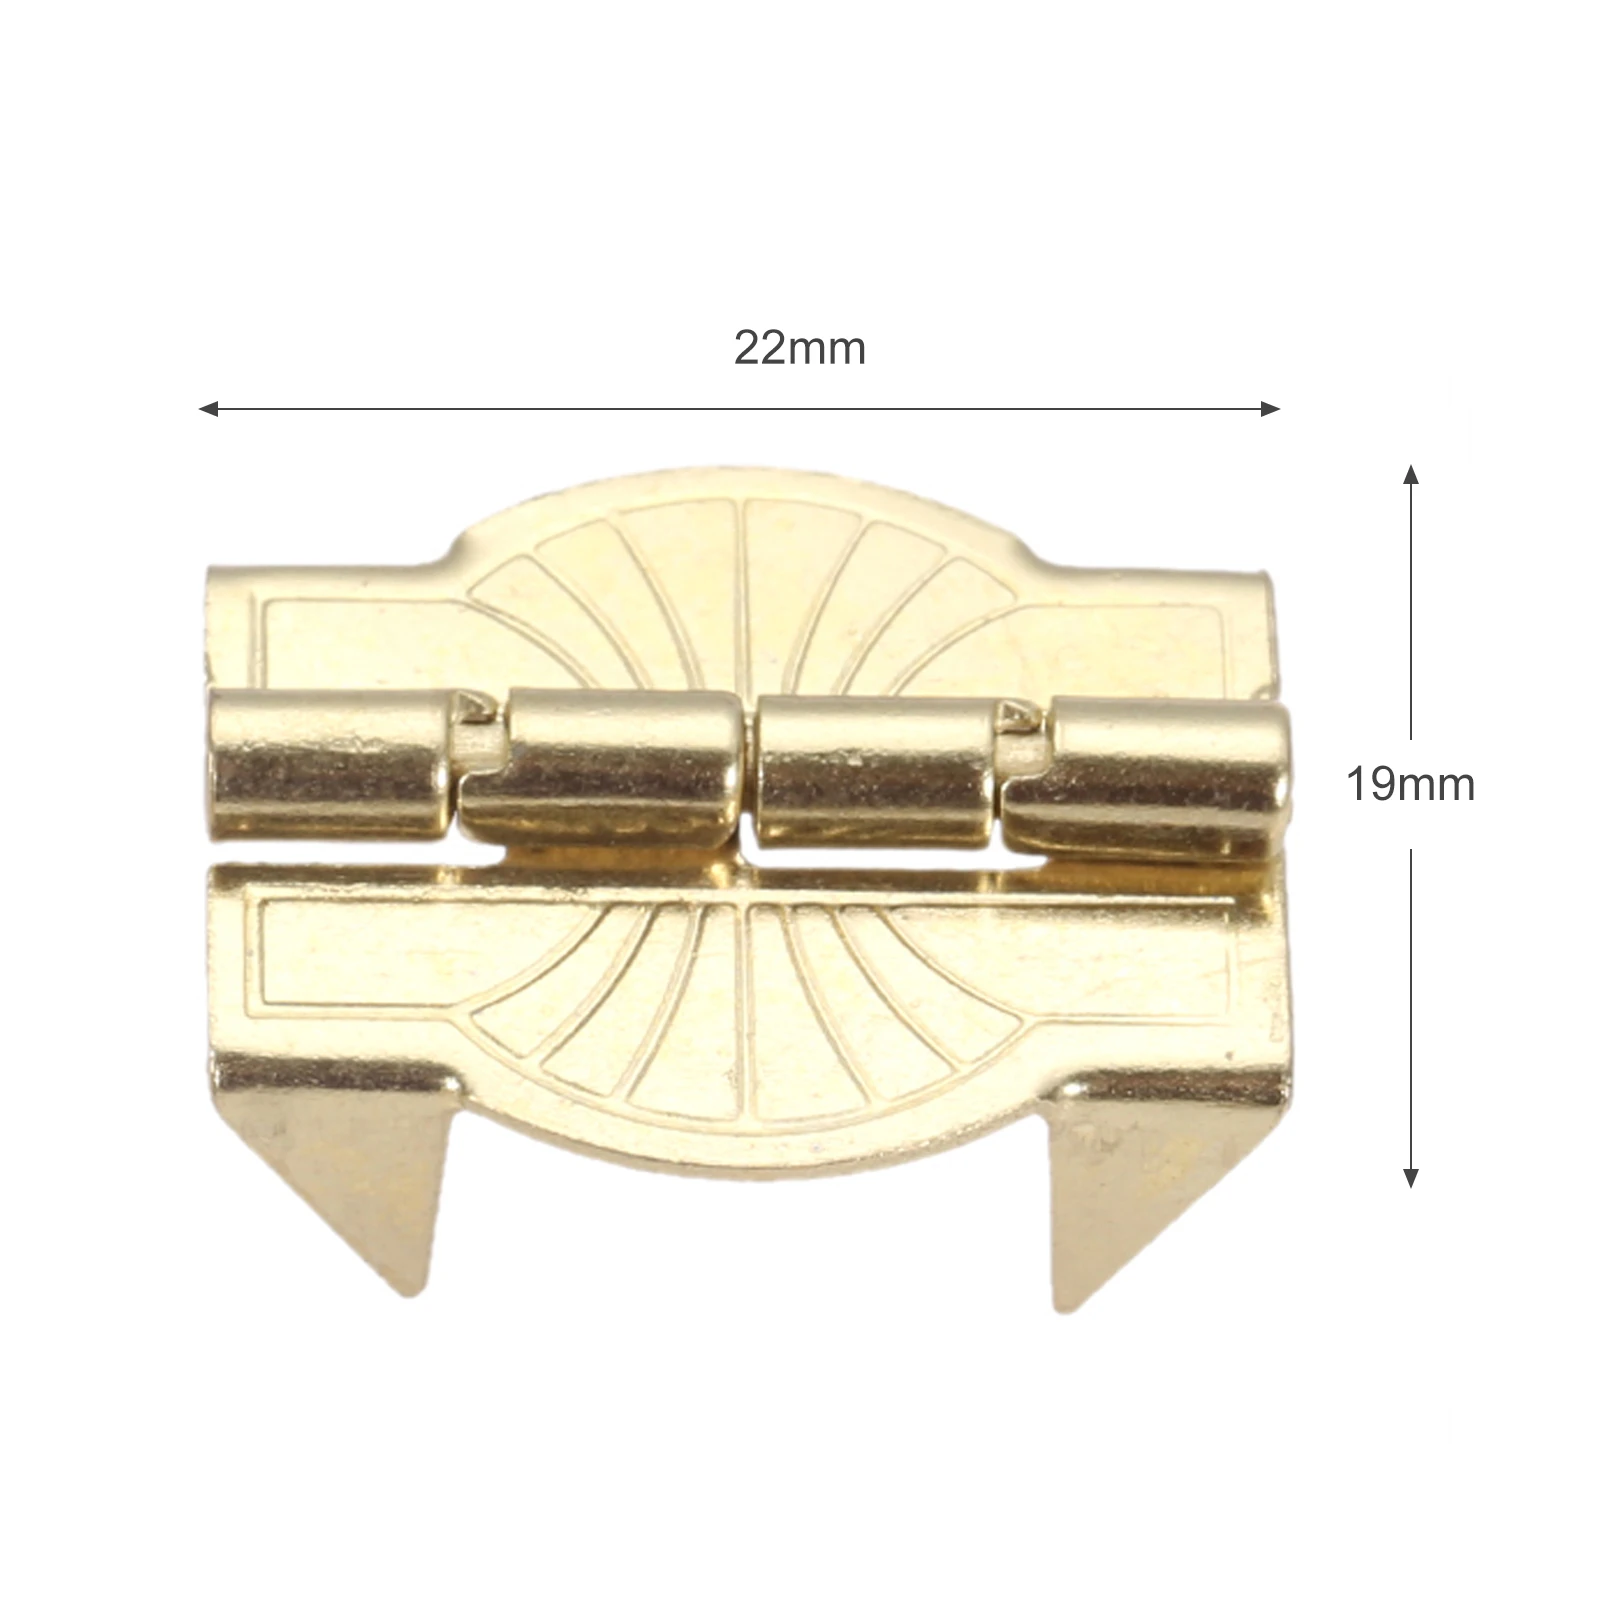 10pcs Metal Cabinet Door Hinge with 4 Legs for Jewelry Wooden Box Wardrobe Furniture Decoration Hinges 22*19mm Gold images - 6